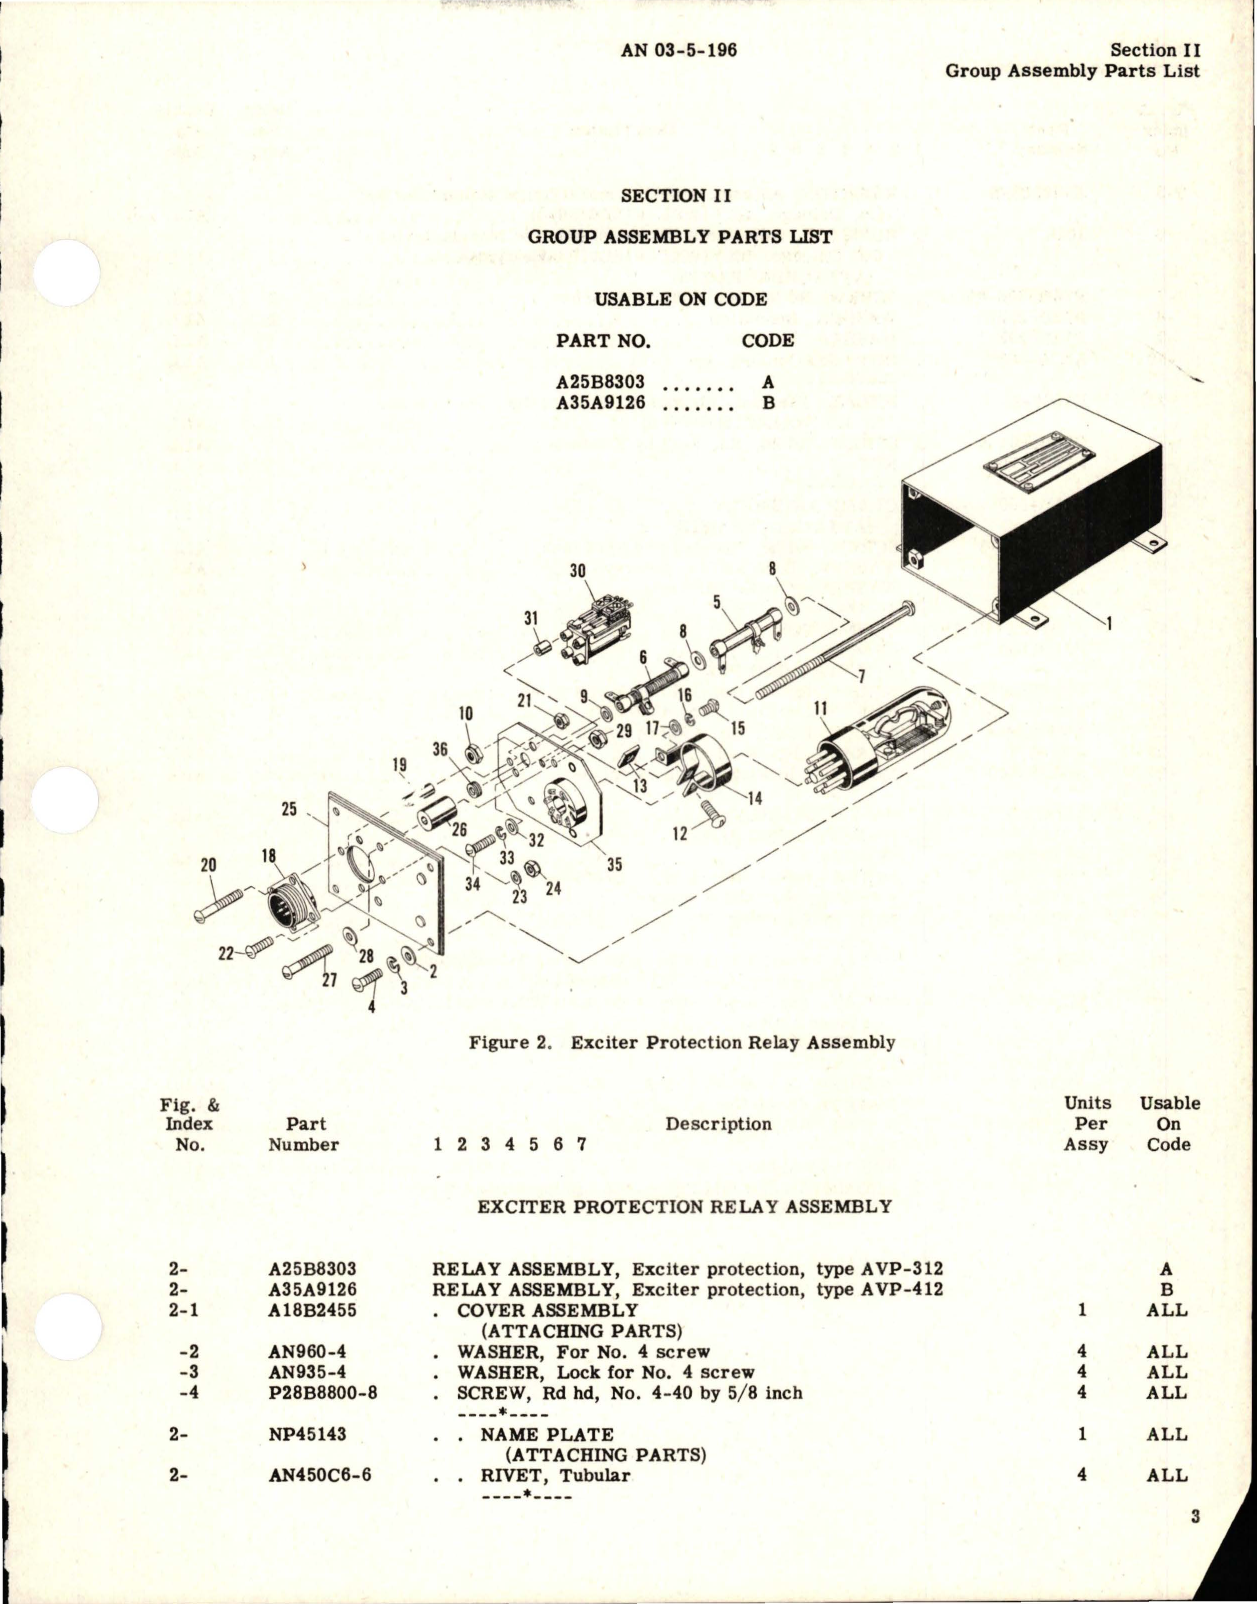 Sample page 5 from AirCorps Library document: Illustrated Parts Breakdown for Exciter Protection Relays - Models A25B8303 (USAF Type A-1) and A35A9126